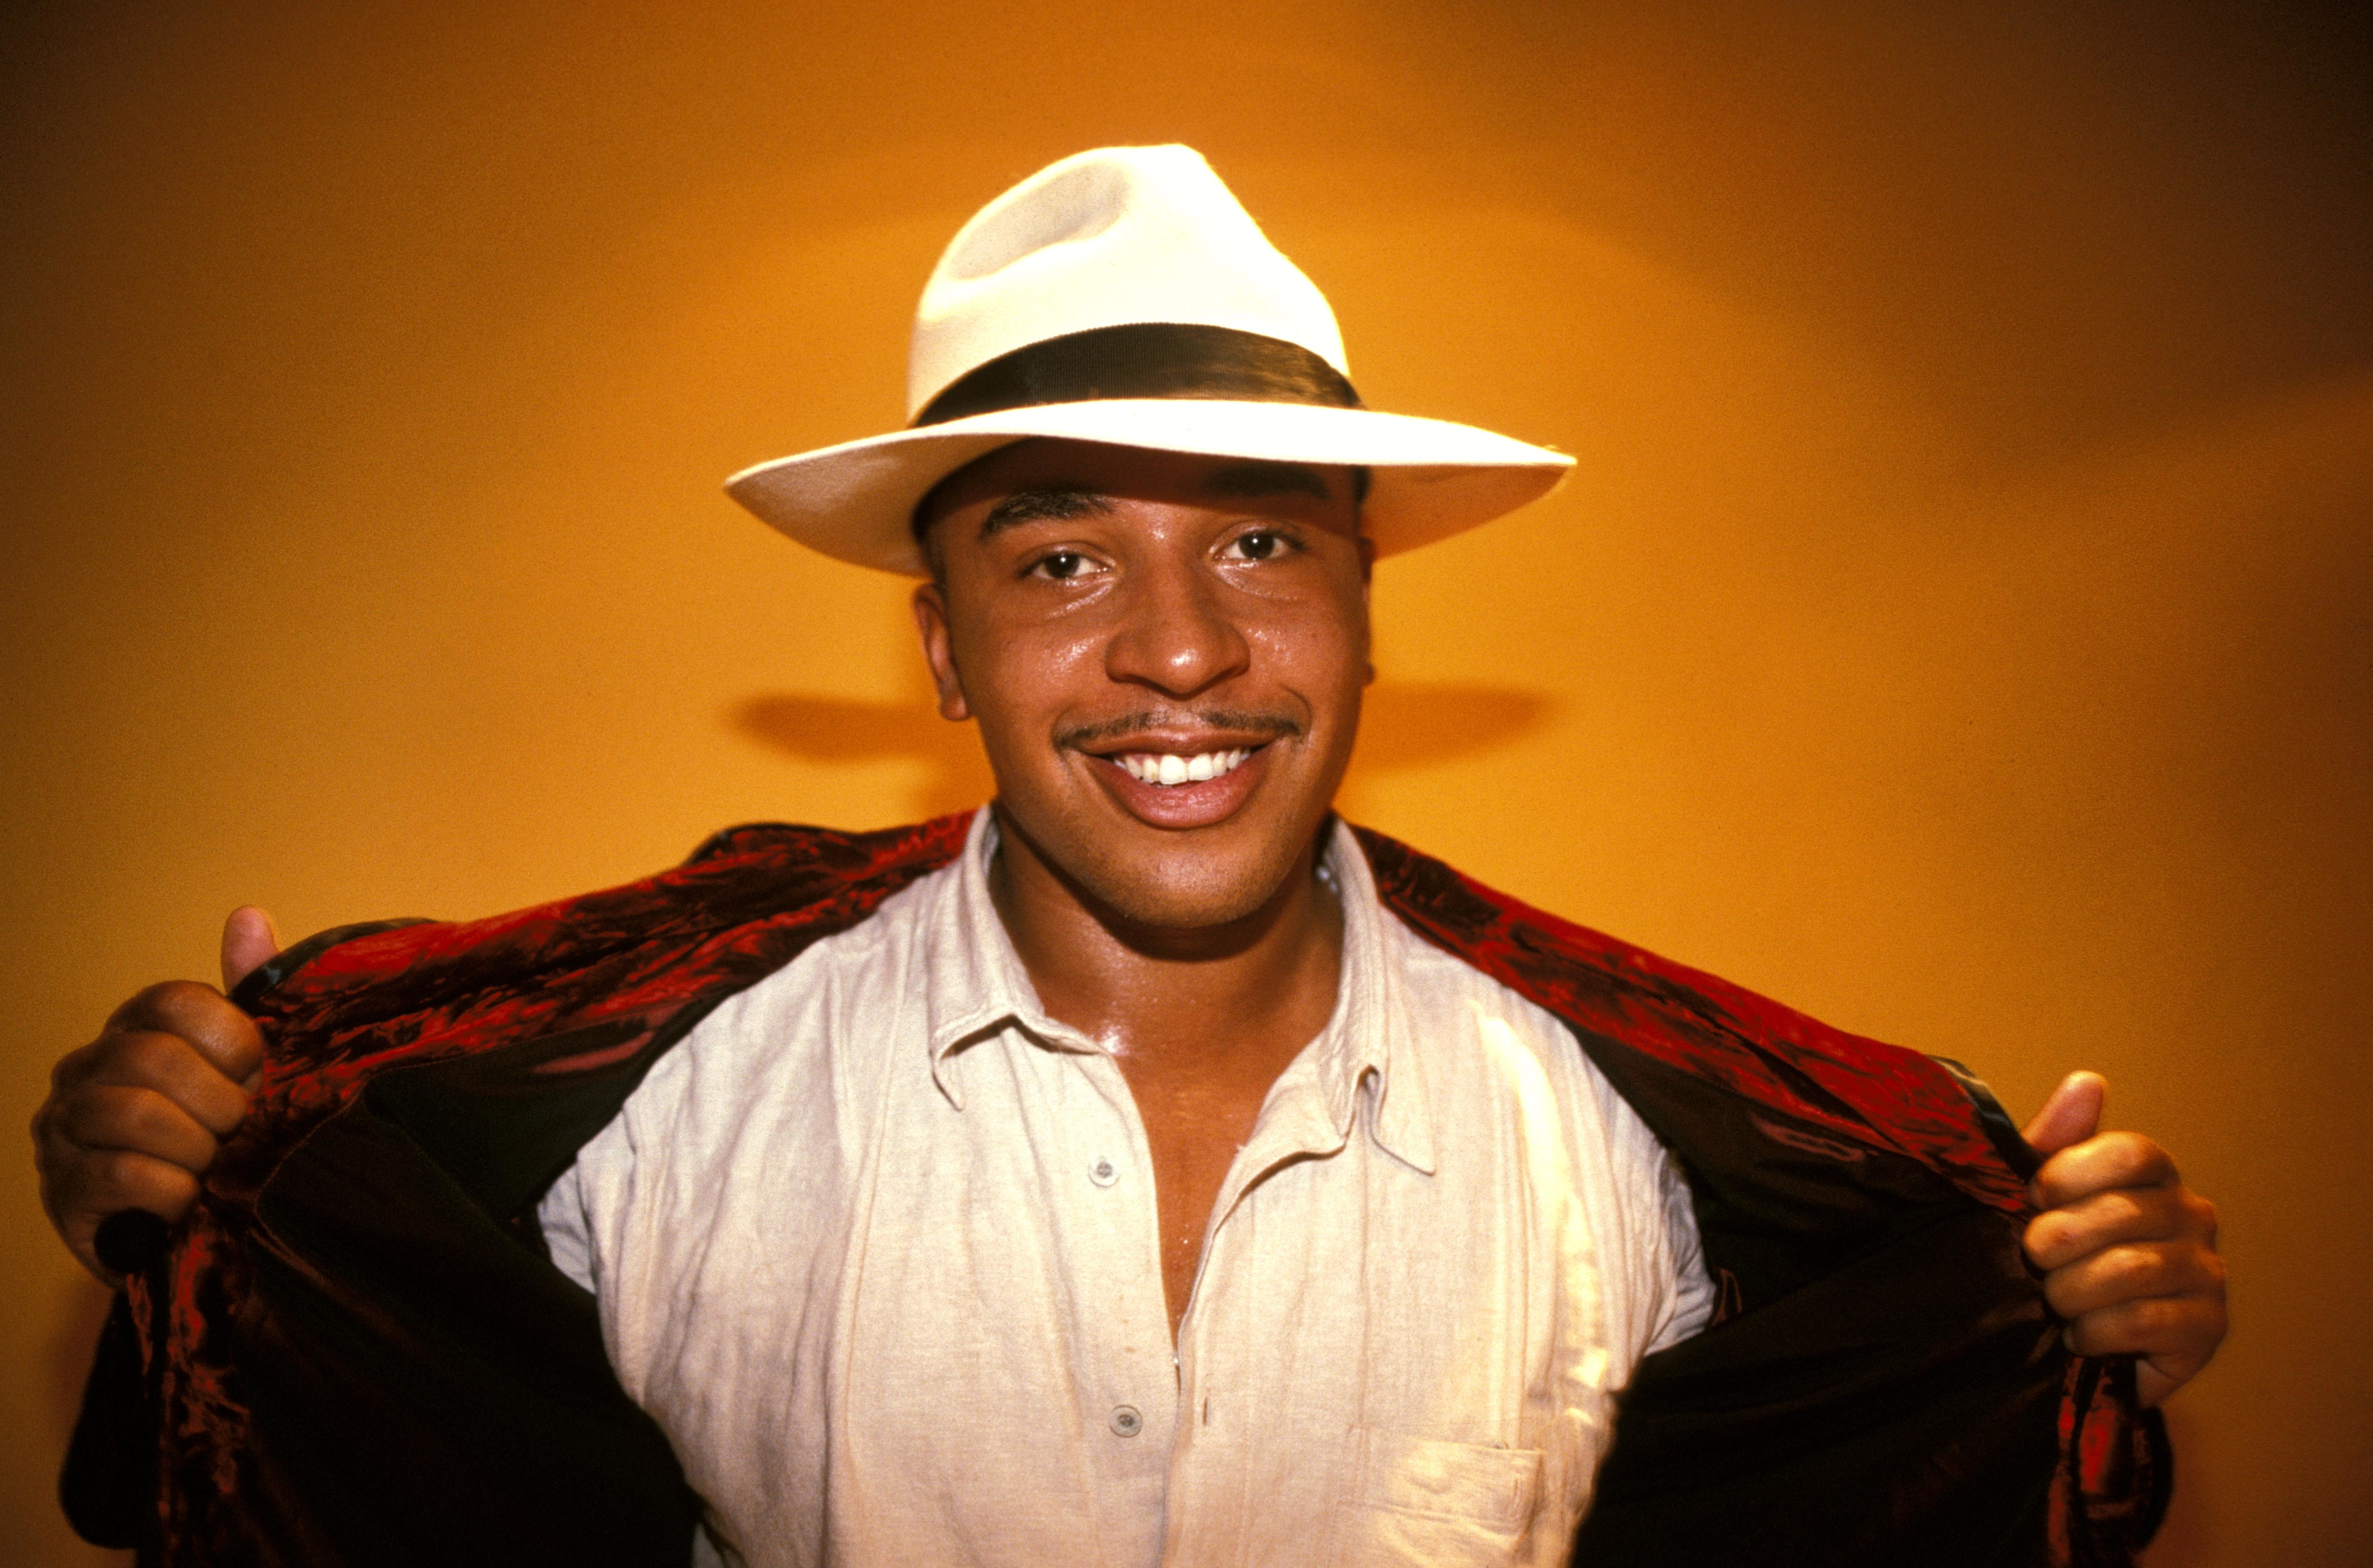 Lou Bega, Mambo No. 5 - Music one-hit wonders: Where are they now? | Gallery | 0